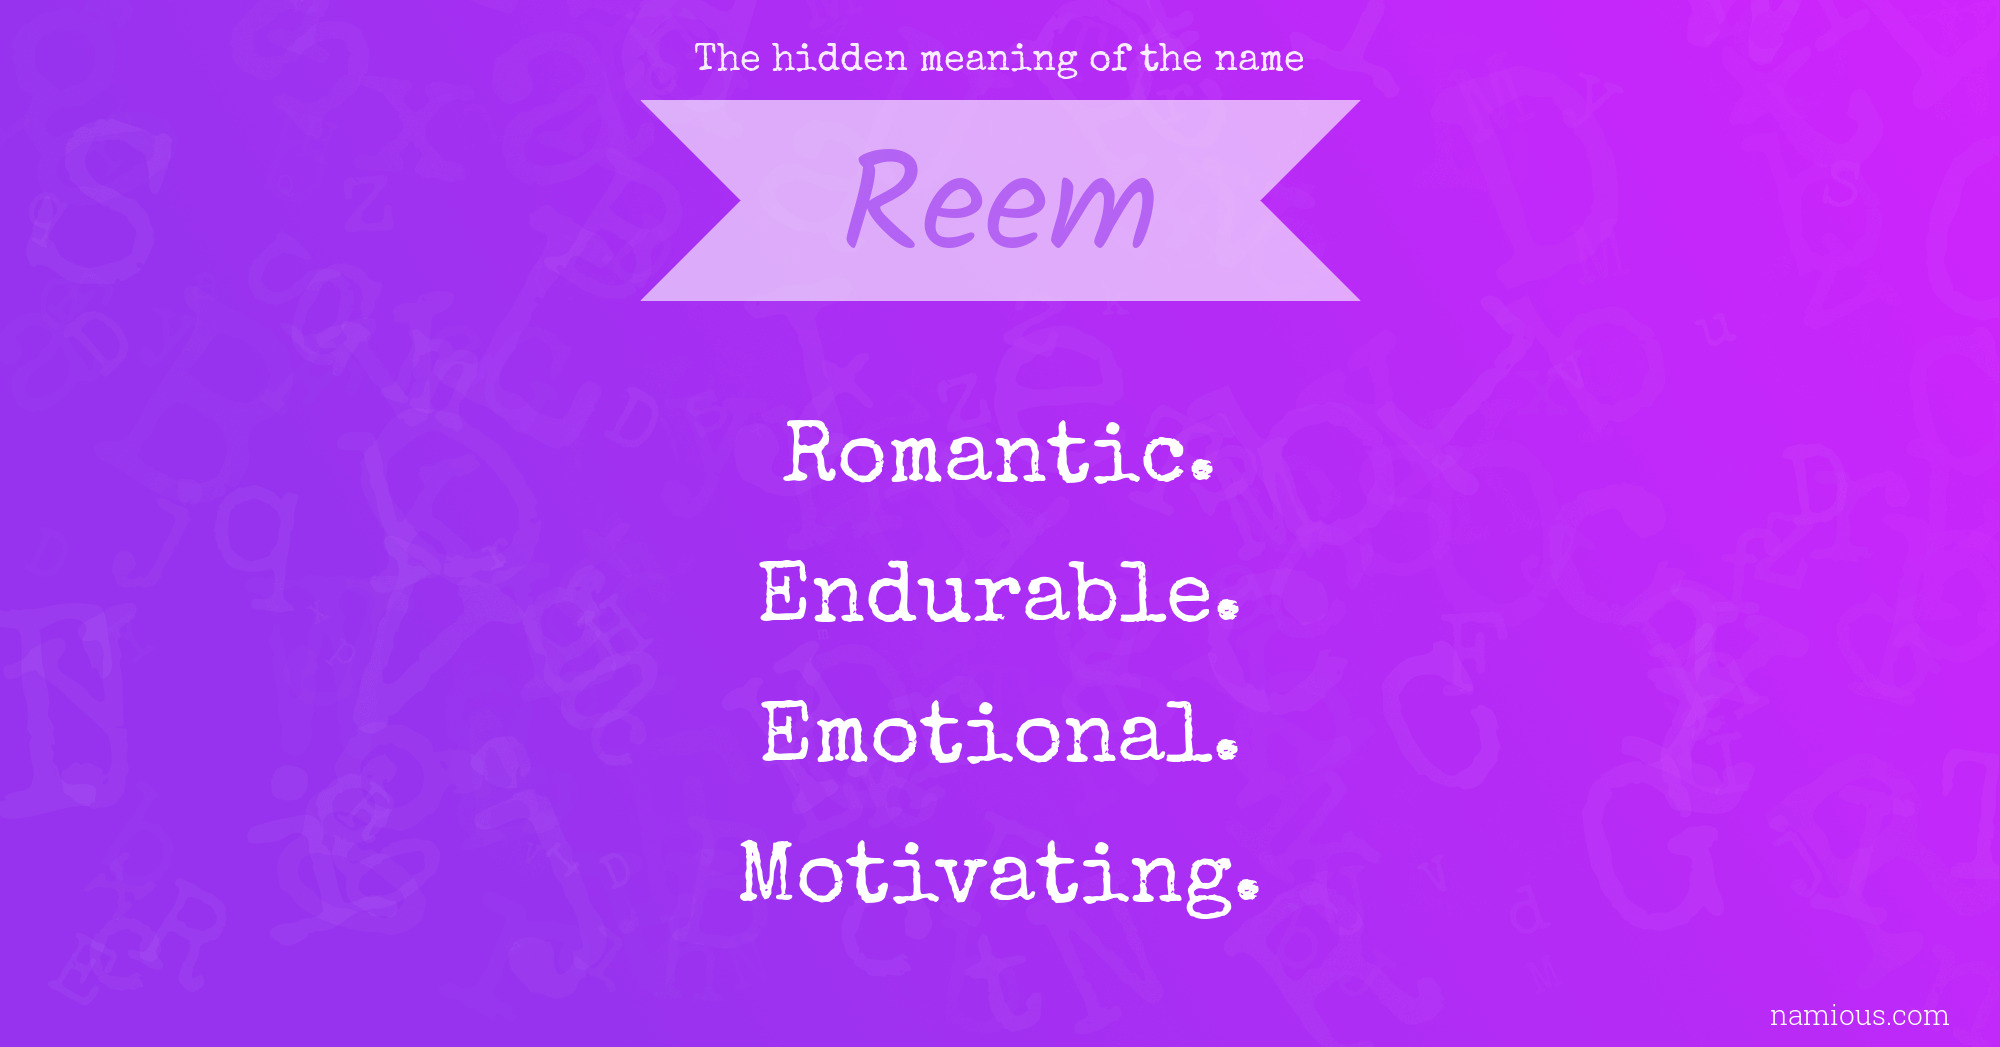 The hidden meaning of the name Reem